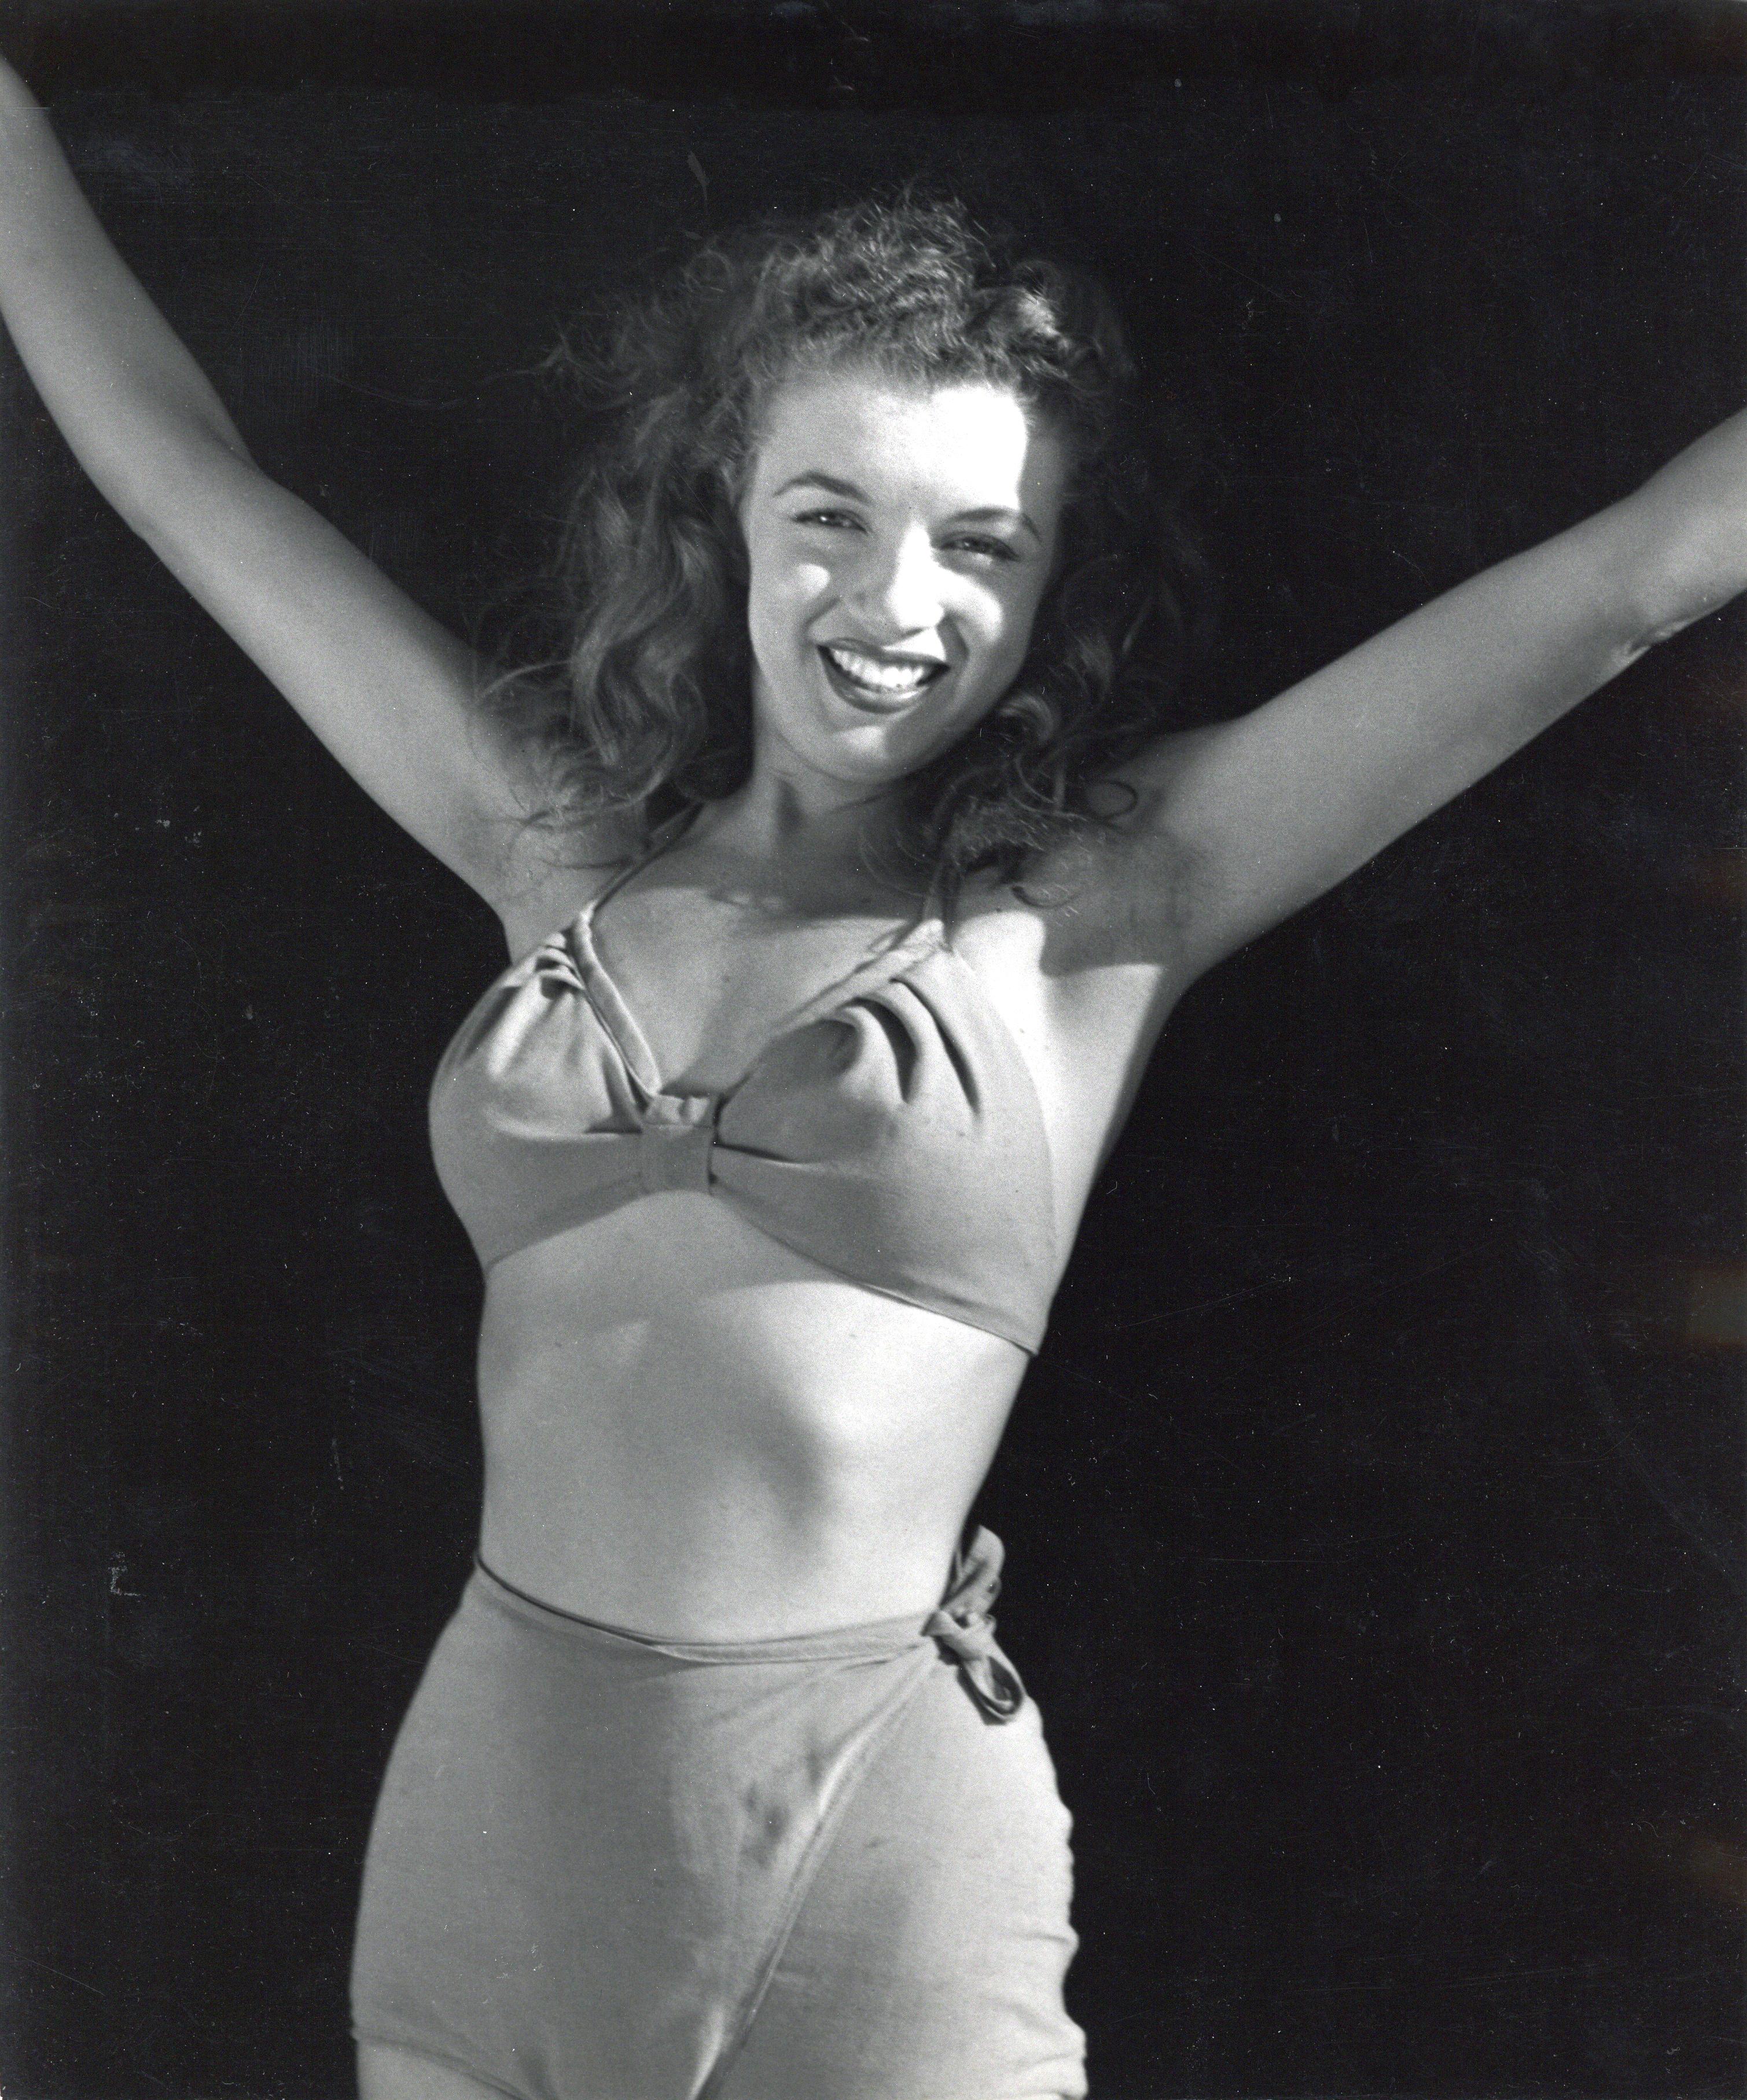 Andre de Dienes Black and White Photograph - Marilyn Monroe 'Norma Jeane' Striking a Pose Vintage Original Photograph